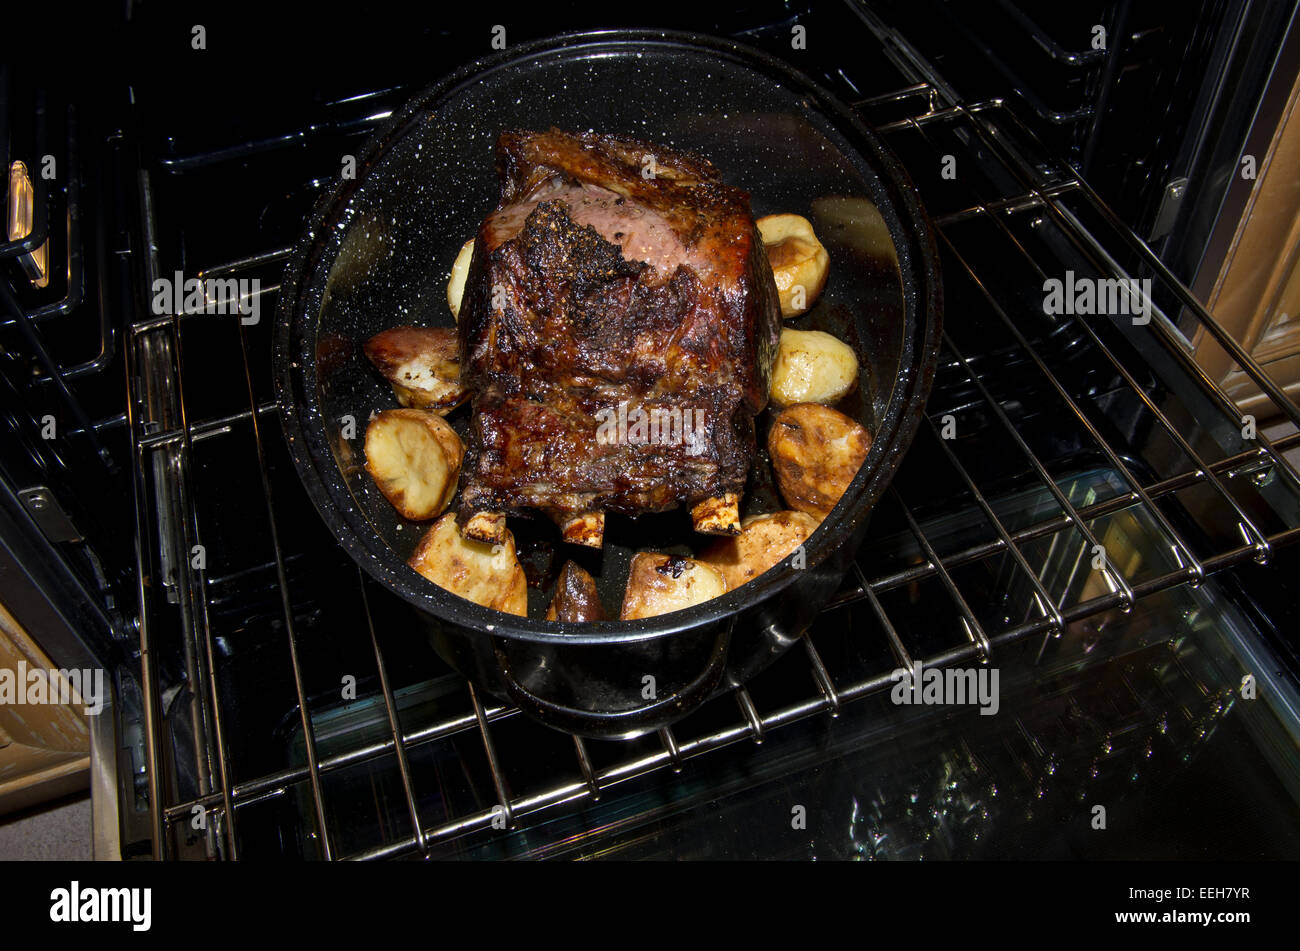 Prime Rib roast coming out of oven Stock Photo